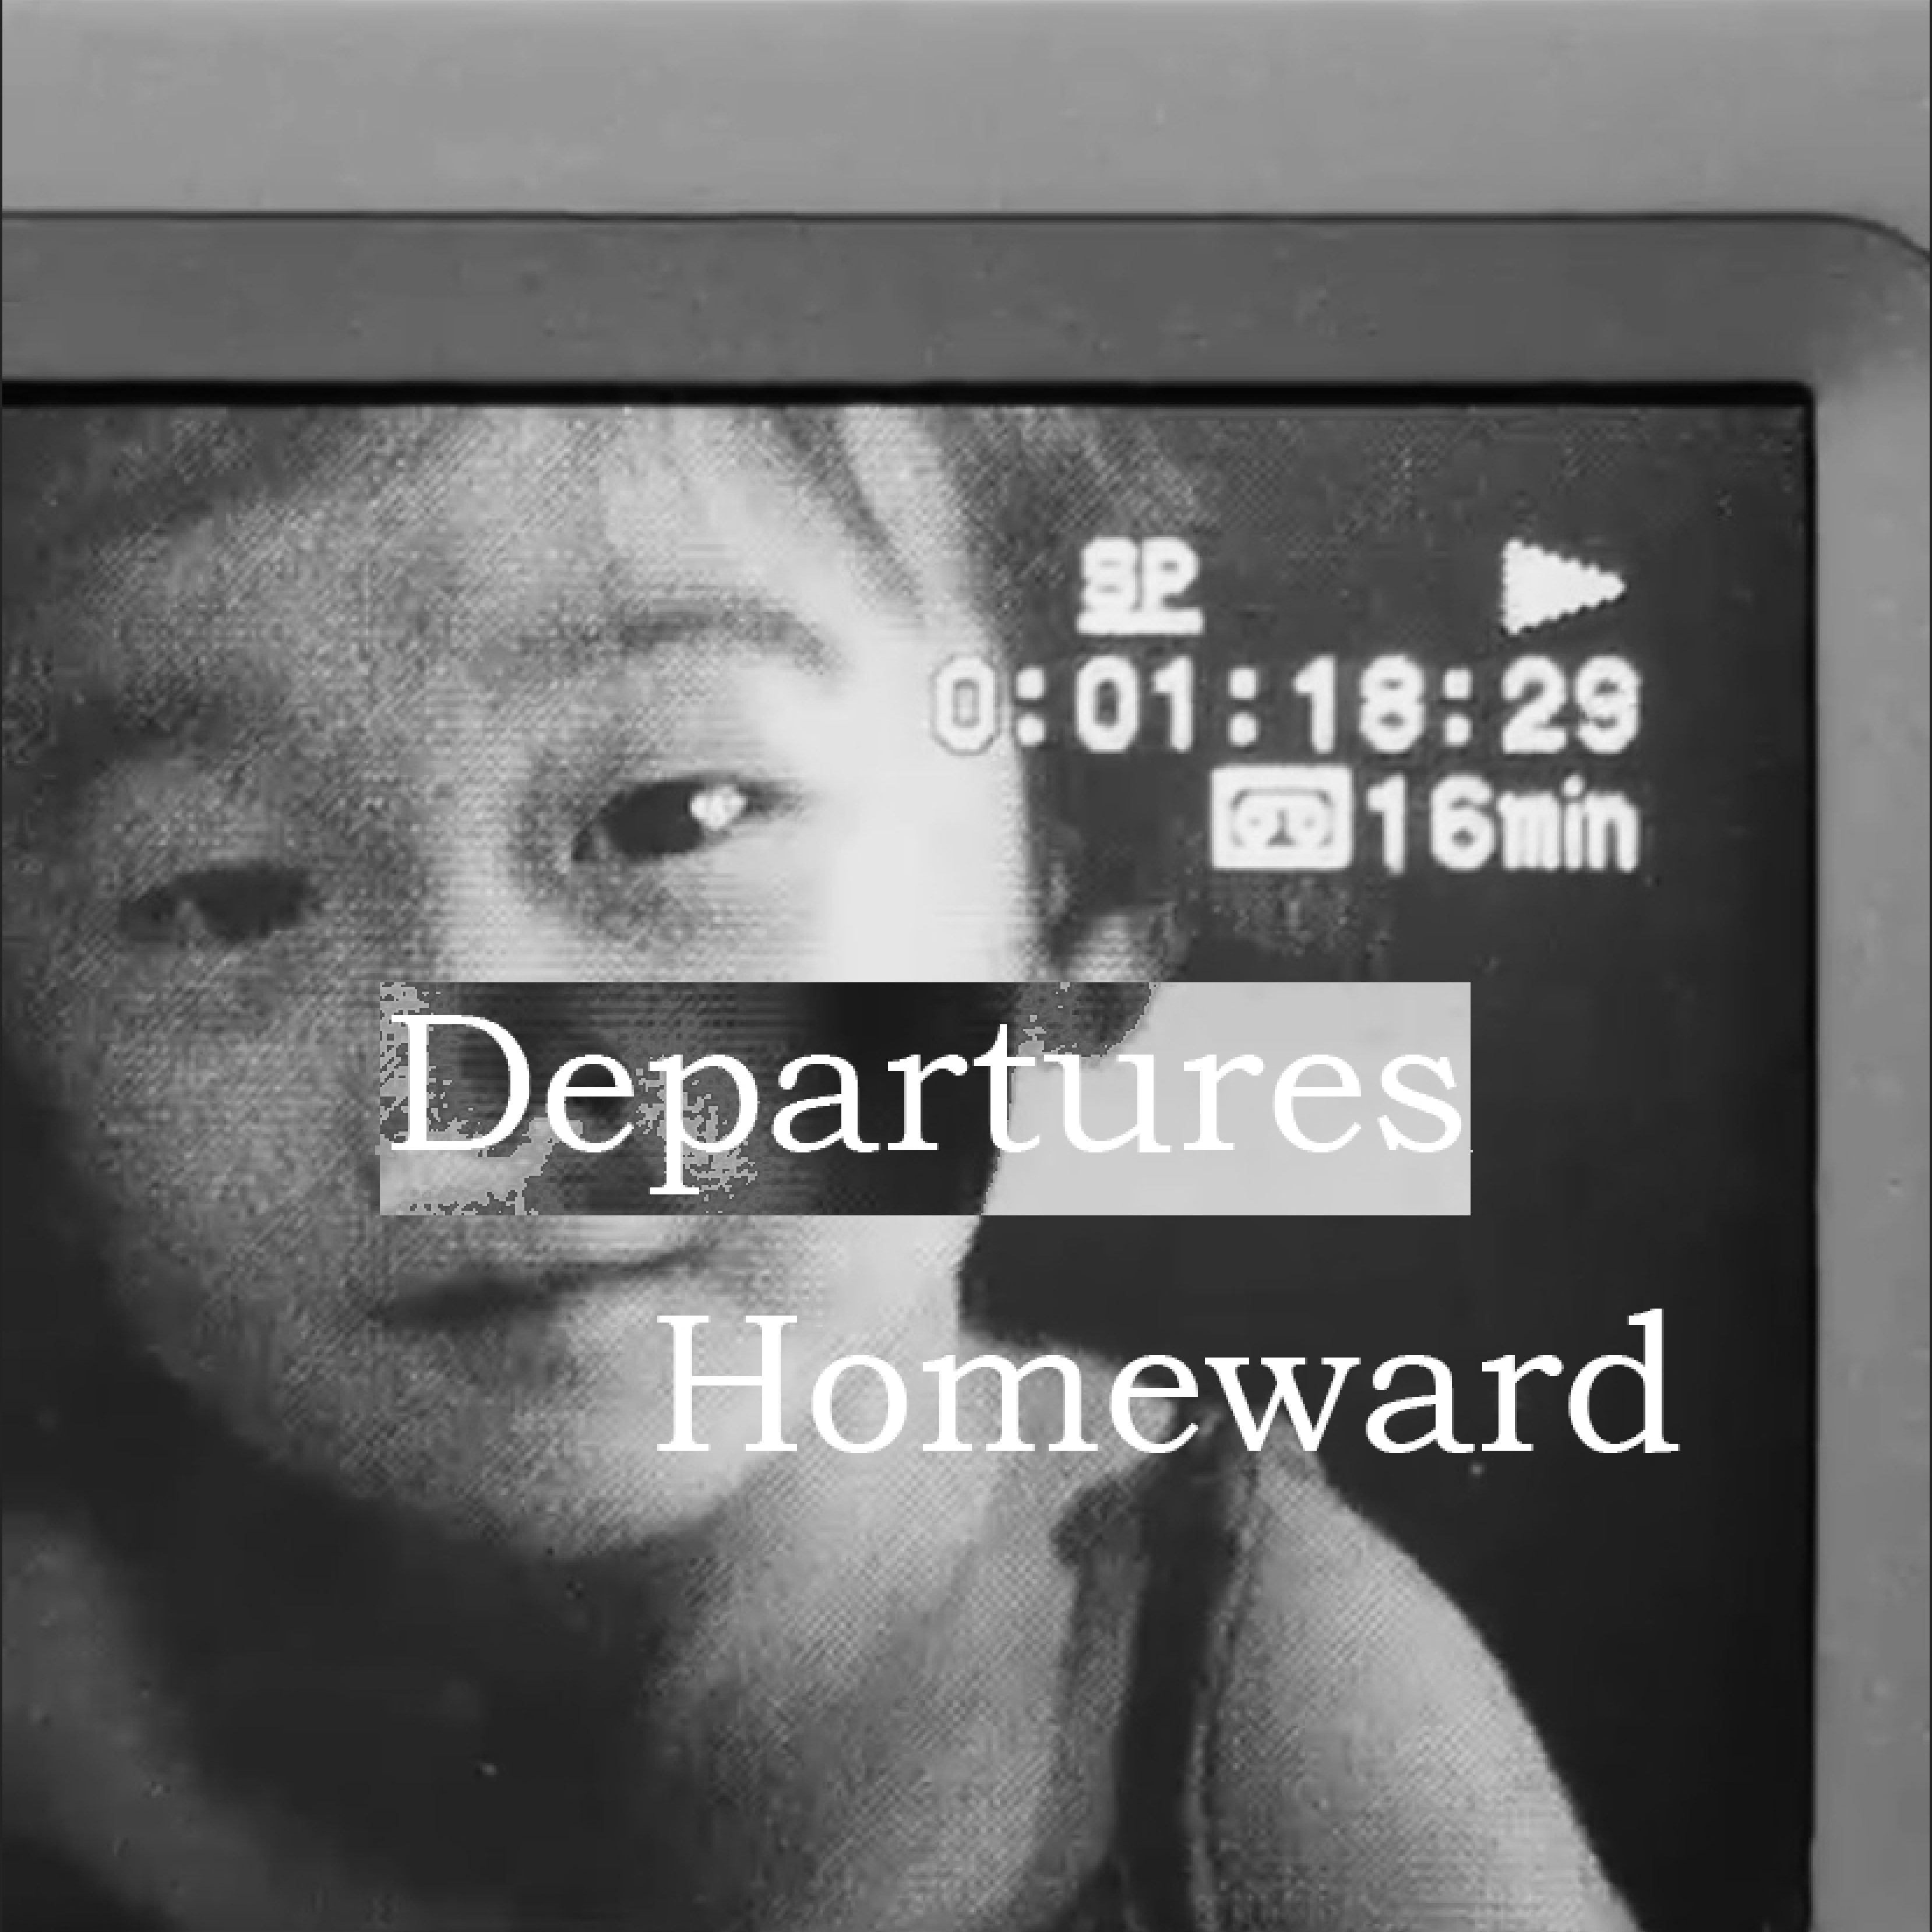 Capturing a moment of an Asian little girl looking into the camera in a home videotape. In the center of the picture it says, Departures Homeward.